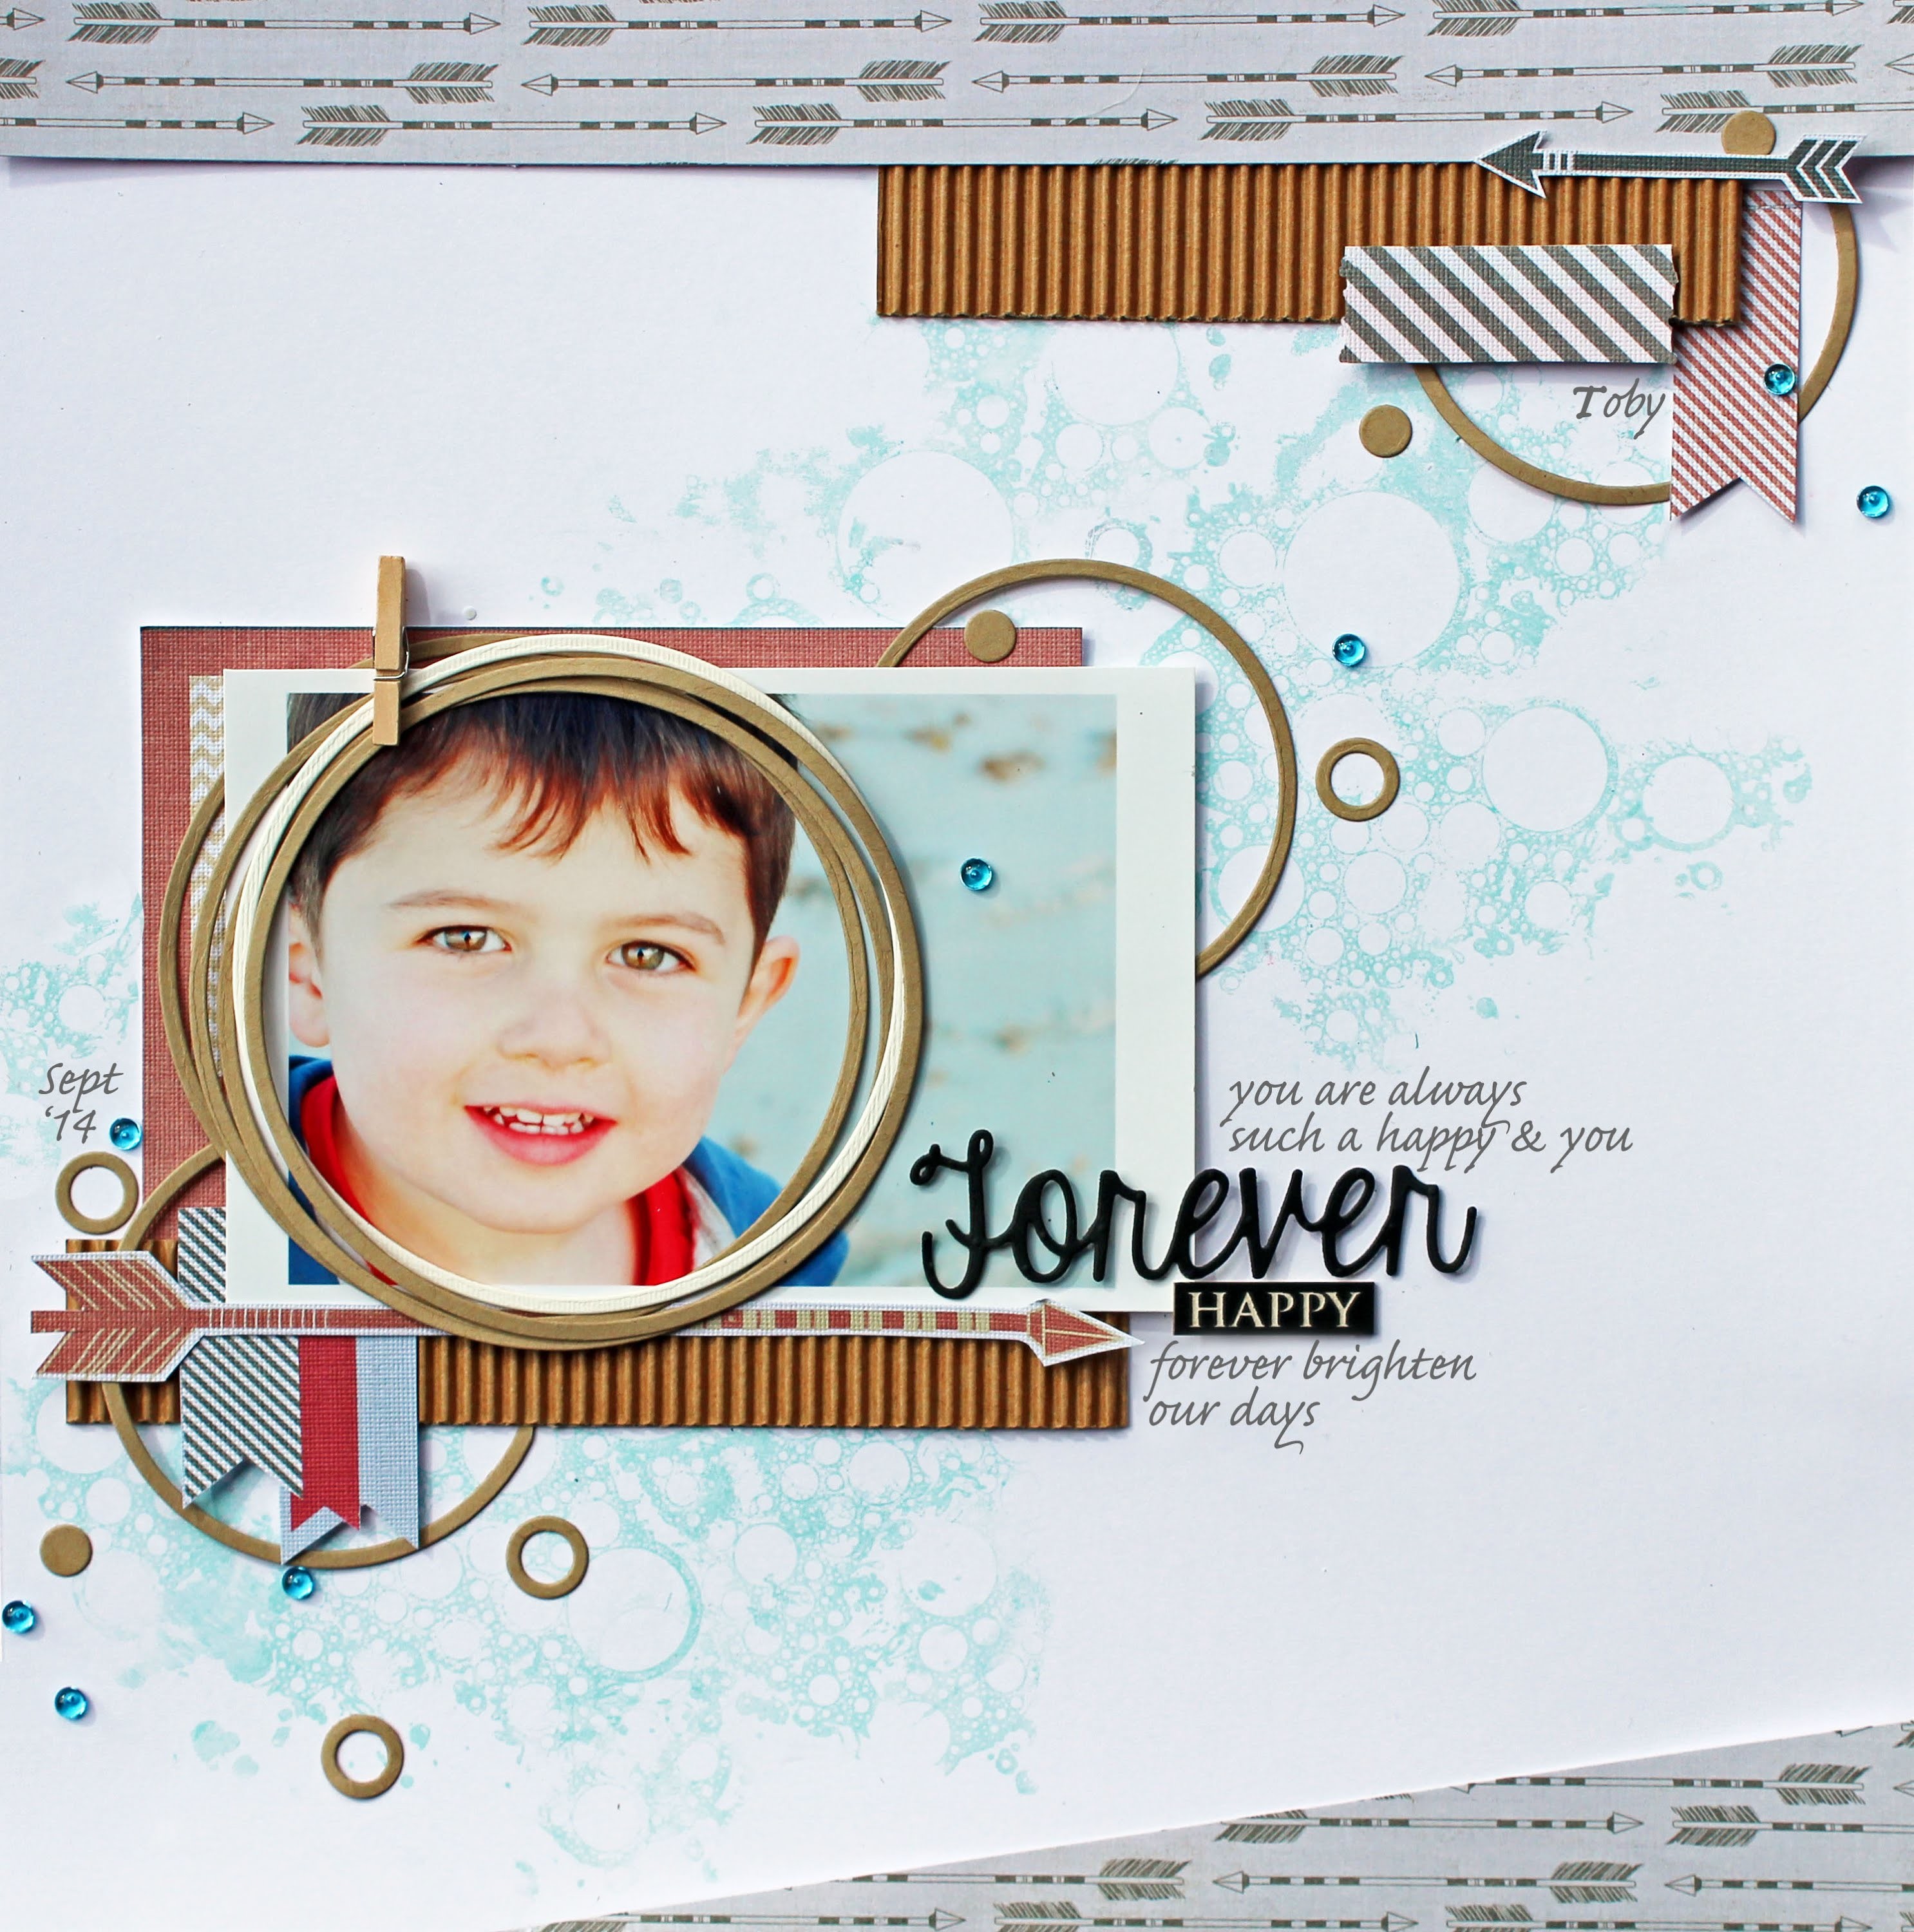 How to: Create a Textured, Layered & Modern Scrapbook Layout